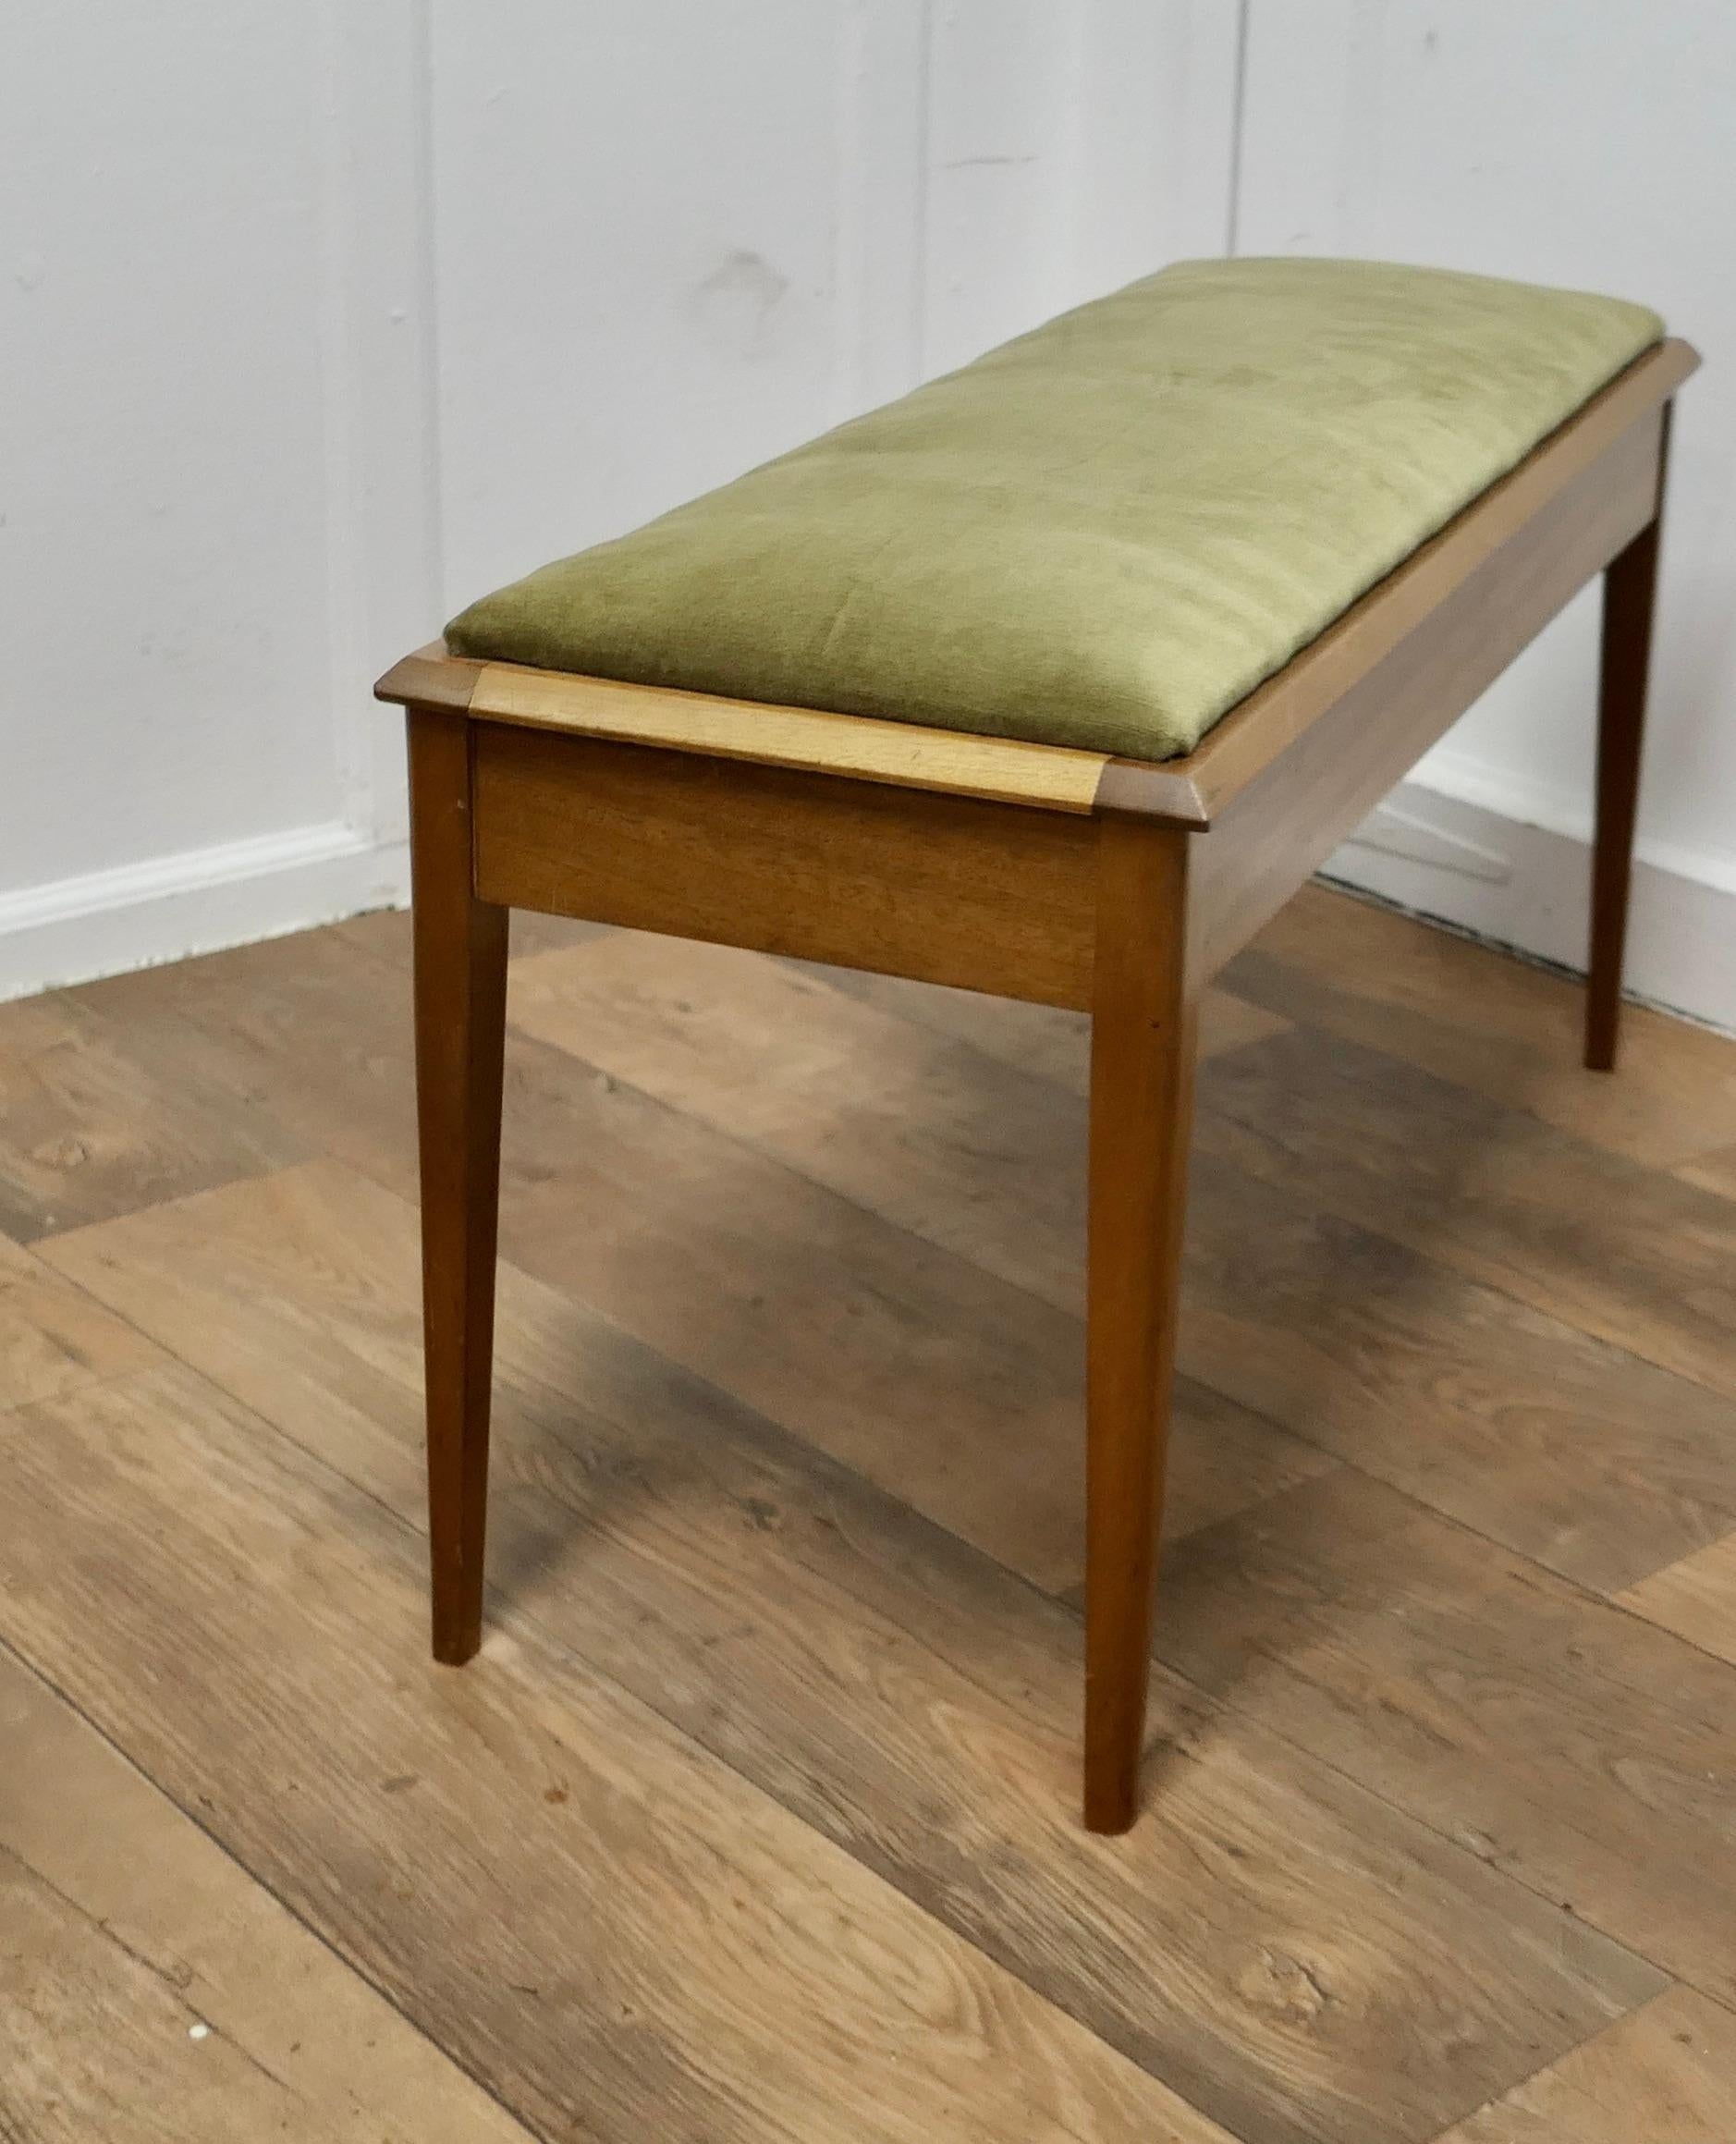 Mid Century Duet Stool or Window Seat with Storage

This is a Box style stool with good manuscript storage beneath inside,  the seat is upholstered in Olive Green Velvet, it is in good clean condition
The Stool is 37” long, 19” high and 14”